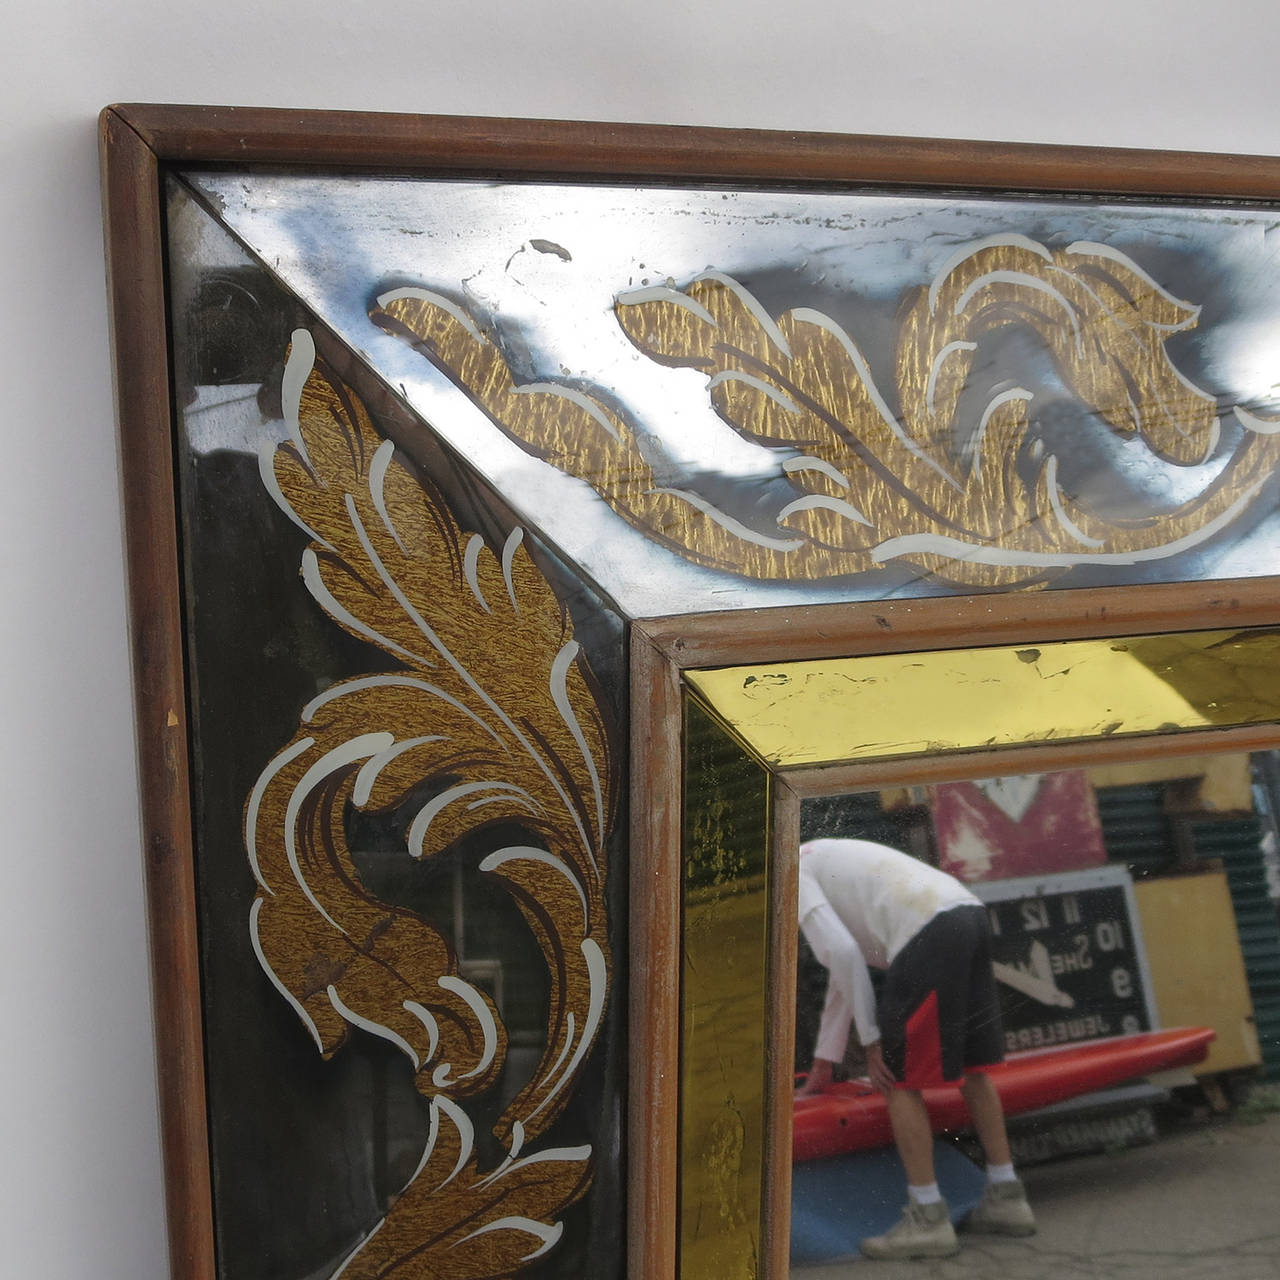 A wonderful decorative mirror in a spectacular scale! This large mirror is framed in panels of wide glass, reverse decorated in a golden fleur-de-lis pattern. The inner bevel of the wooden frame is a golden yellow mirror, intersected with faceted